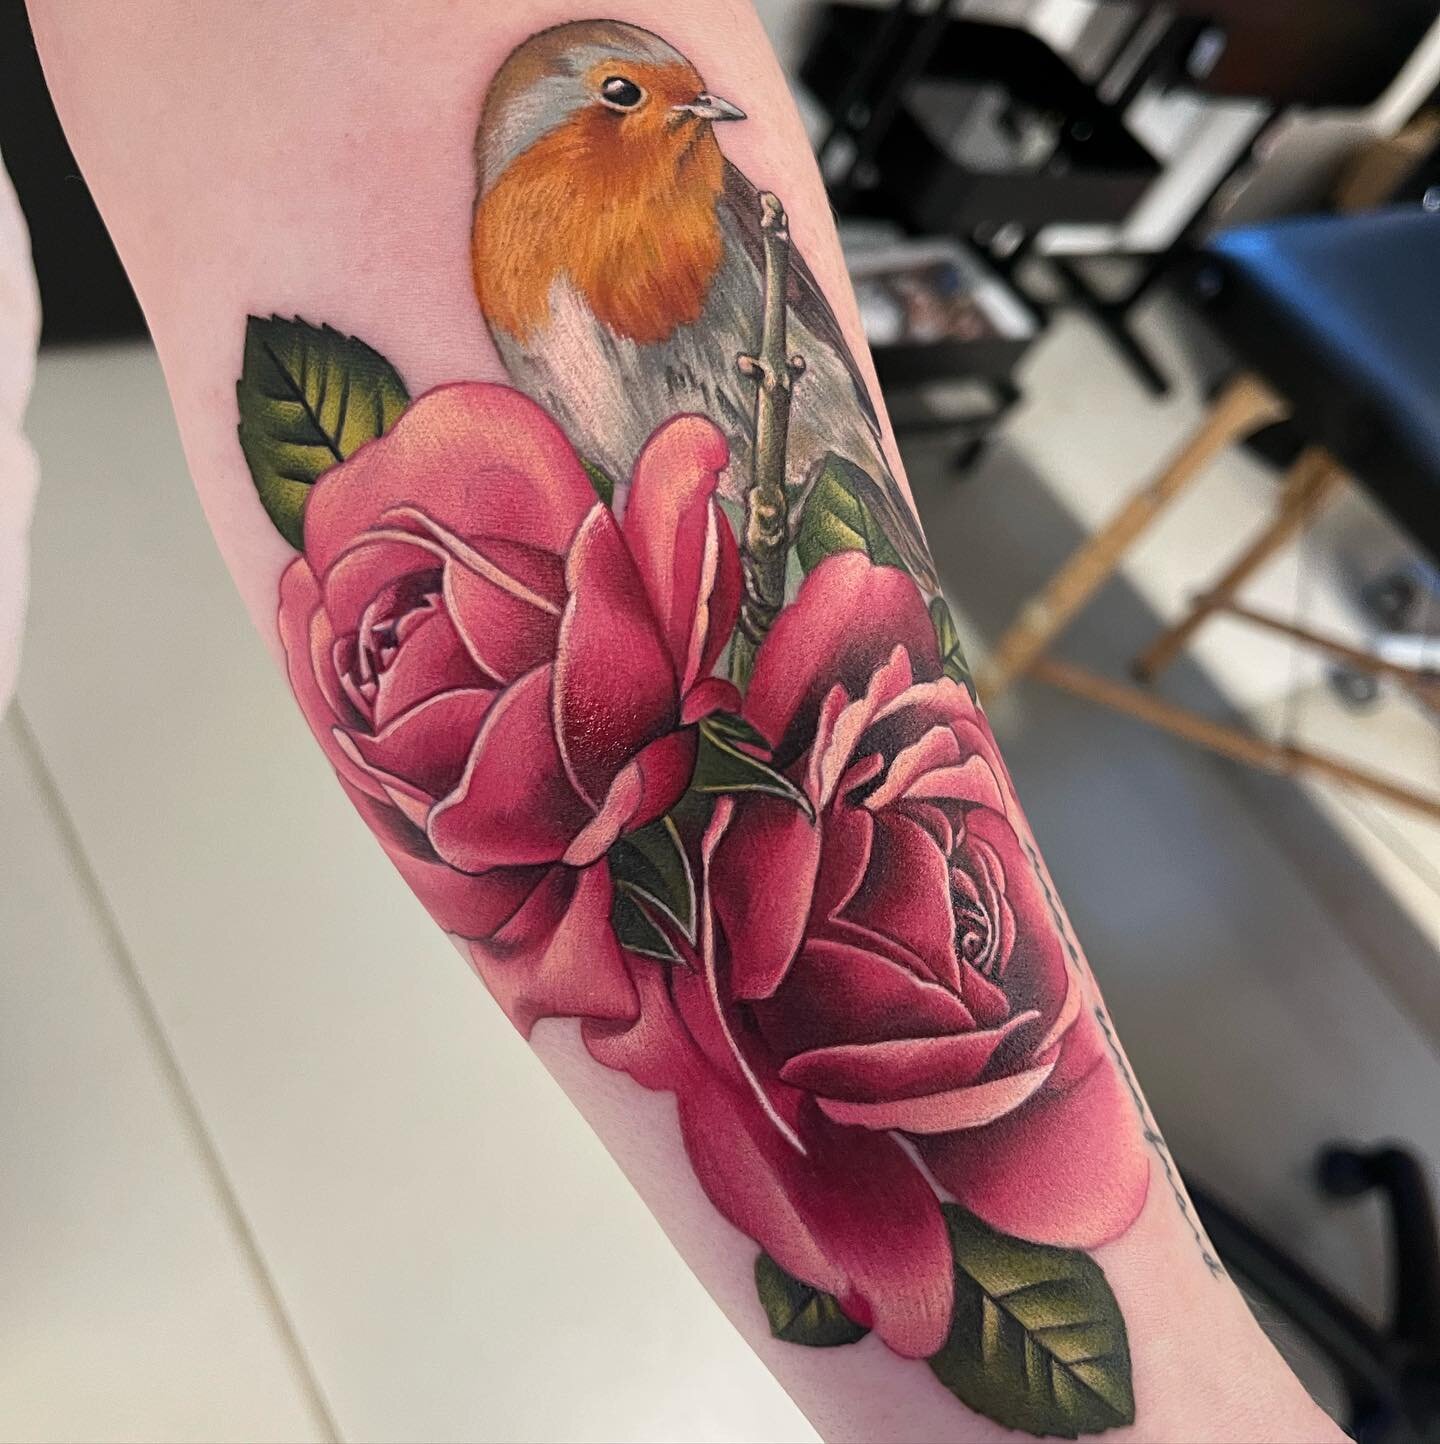 Thank you Steph 😊 

Made with @fusion_ink and @killerinktattoo supplies. I&rsquo;m also a huge fan of @kwadron needles!

Trying to catch up on posting&hellip;

#floraltattoo #robintattoo #naturetattoo #floral #rose #roses #rosetattoo #robin #birds #